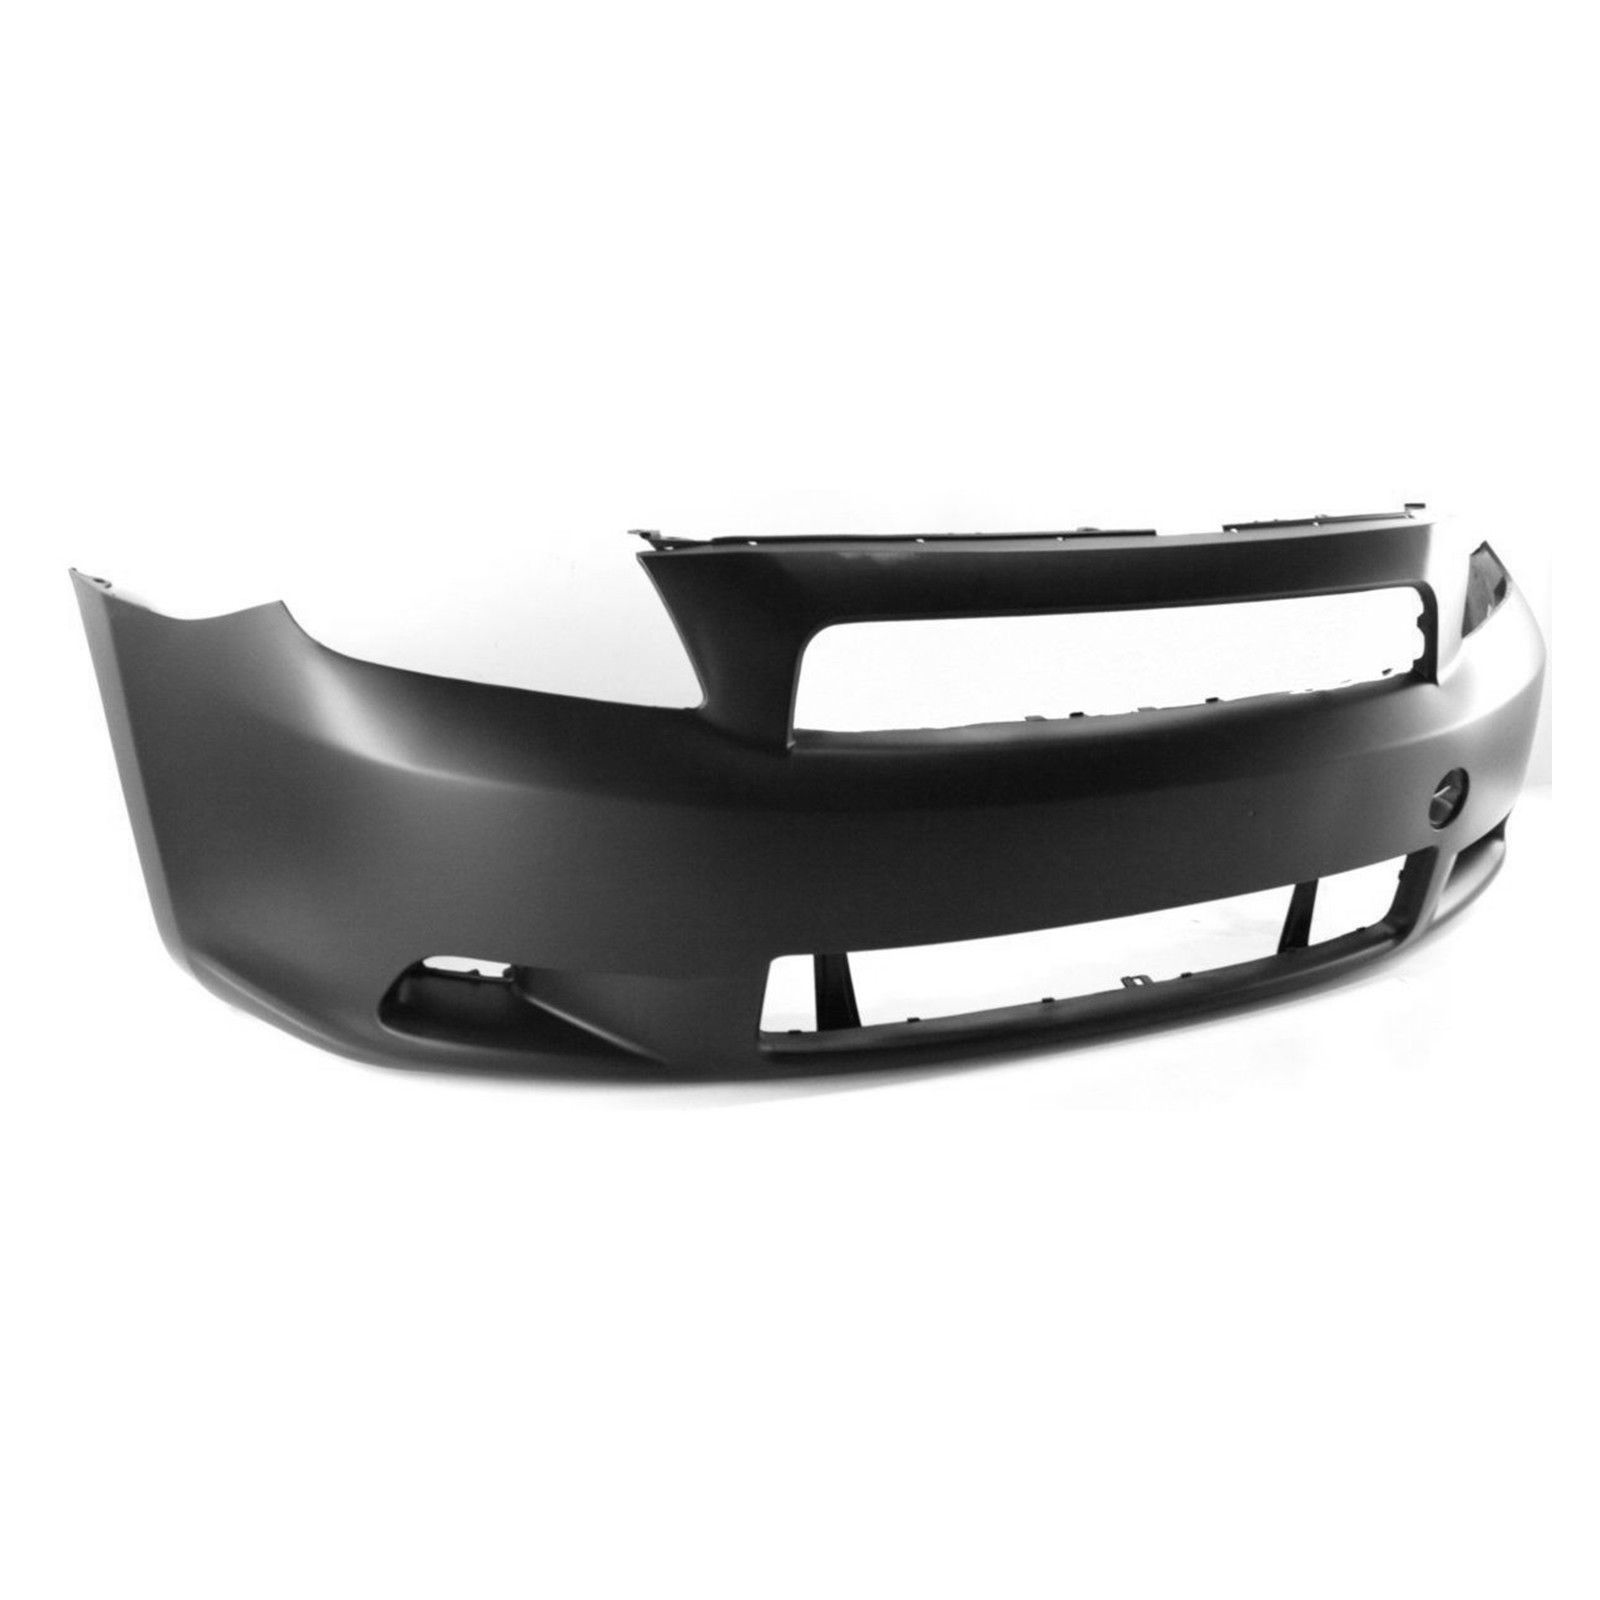 2005-2010 SCION TC Front Bumper Cover Painted to Match